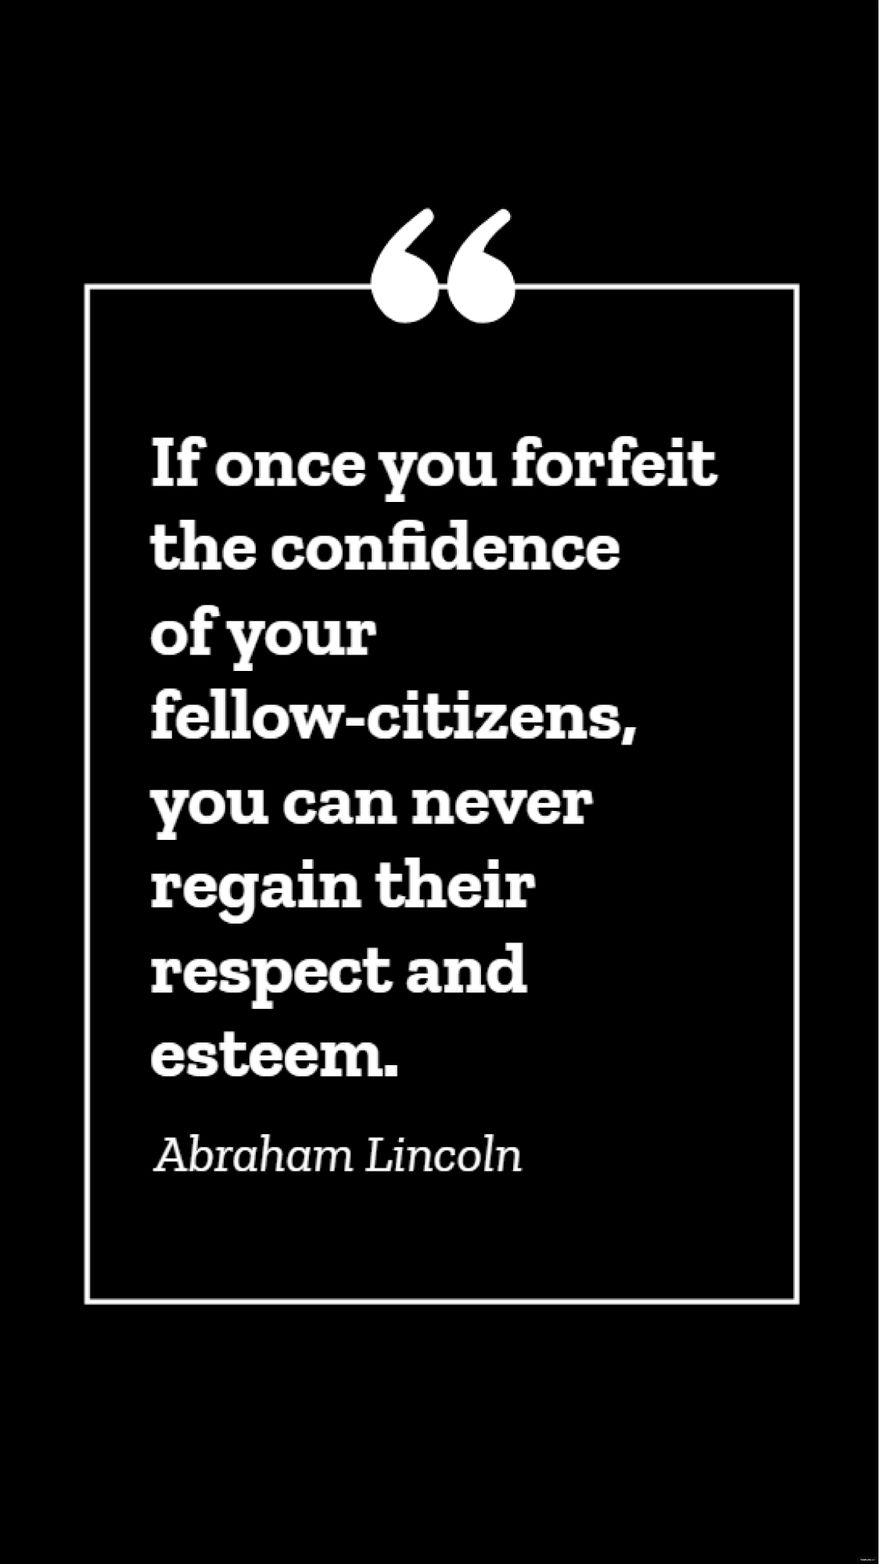 Abraham Lincoln - If once you forfeit the confidence of your fellow-citizens, you can never regain their respect and esteem.